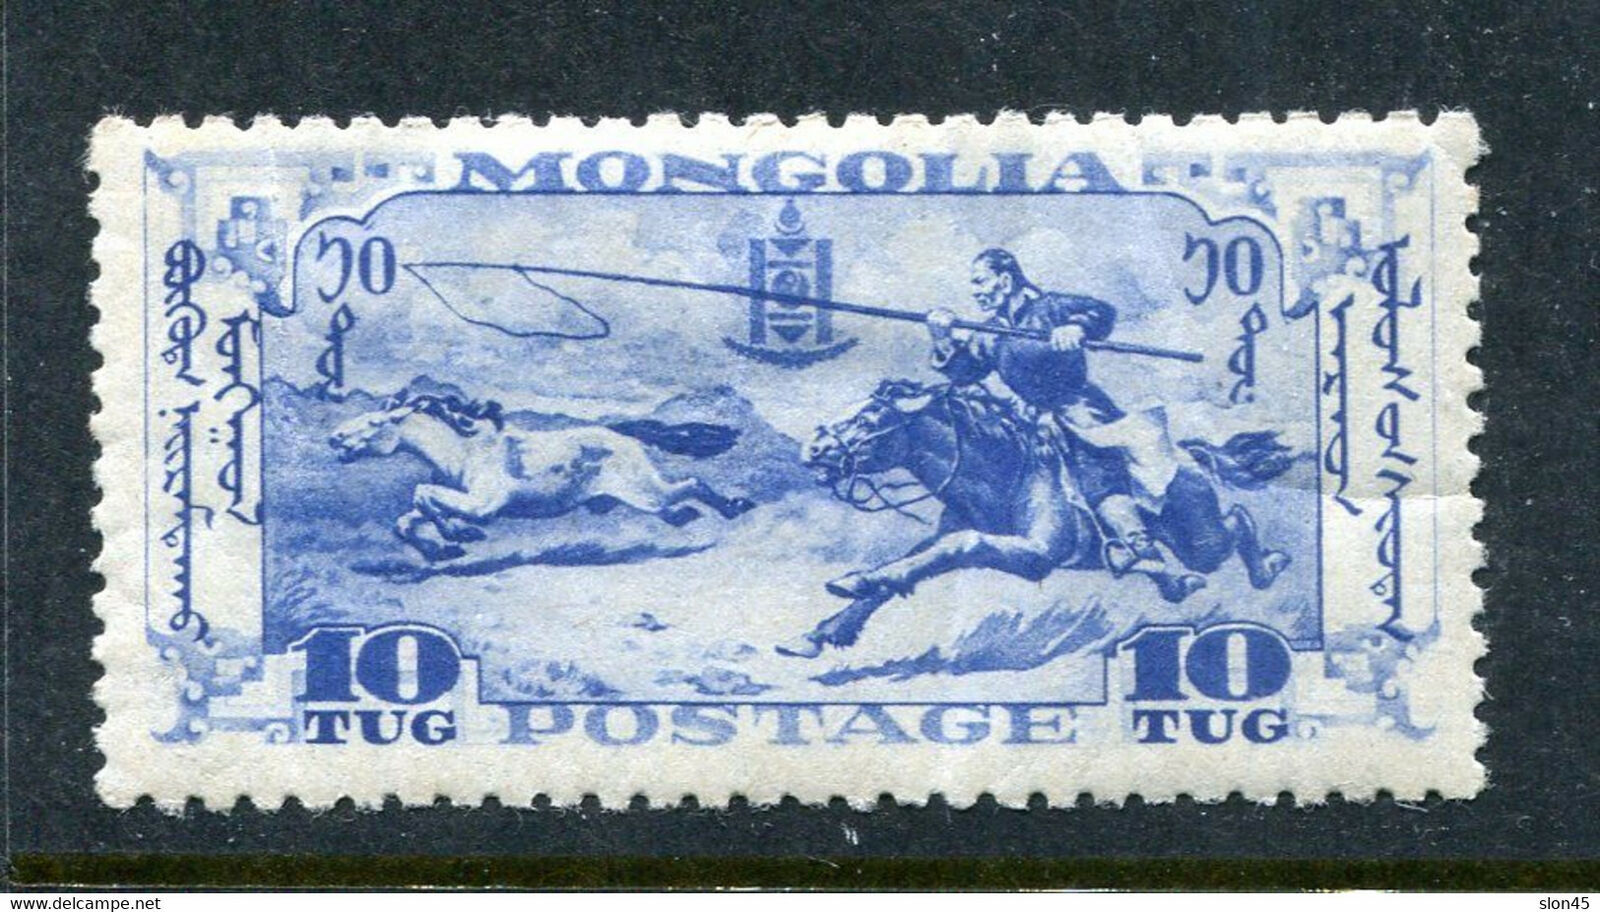 Primary image for Mongolia 1932 10t key stamp MH slightly folded Sc 74 12527